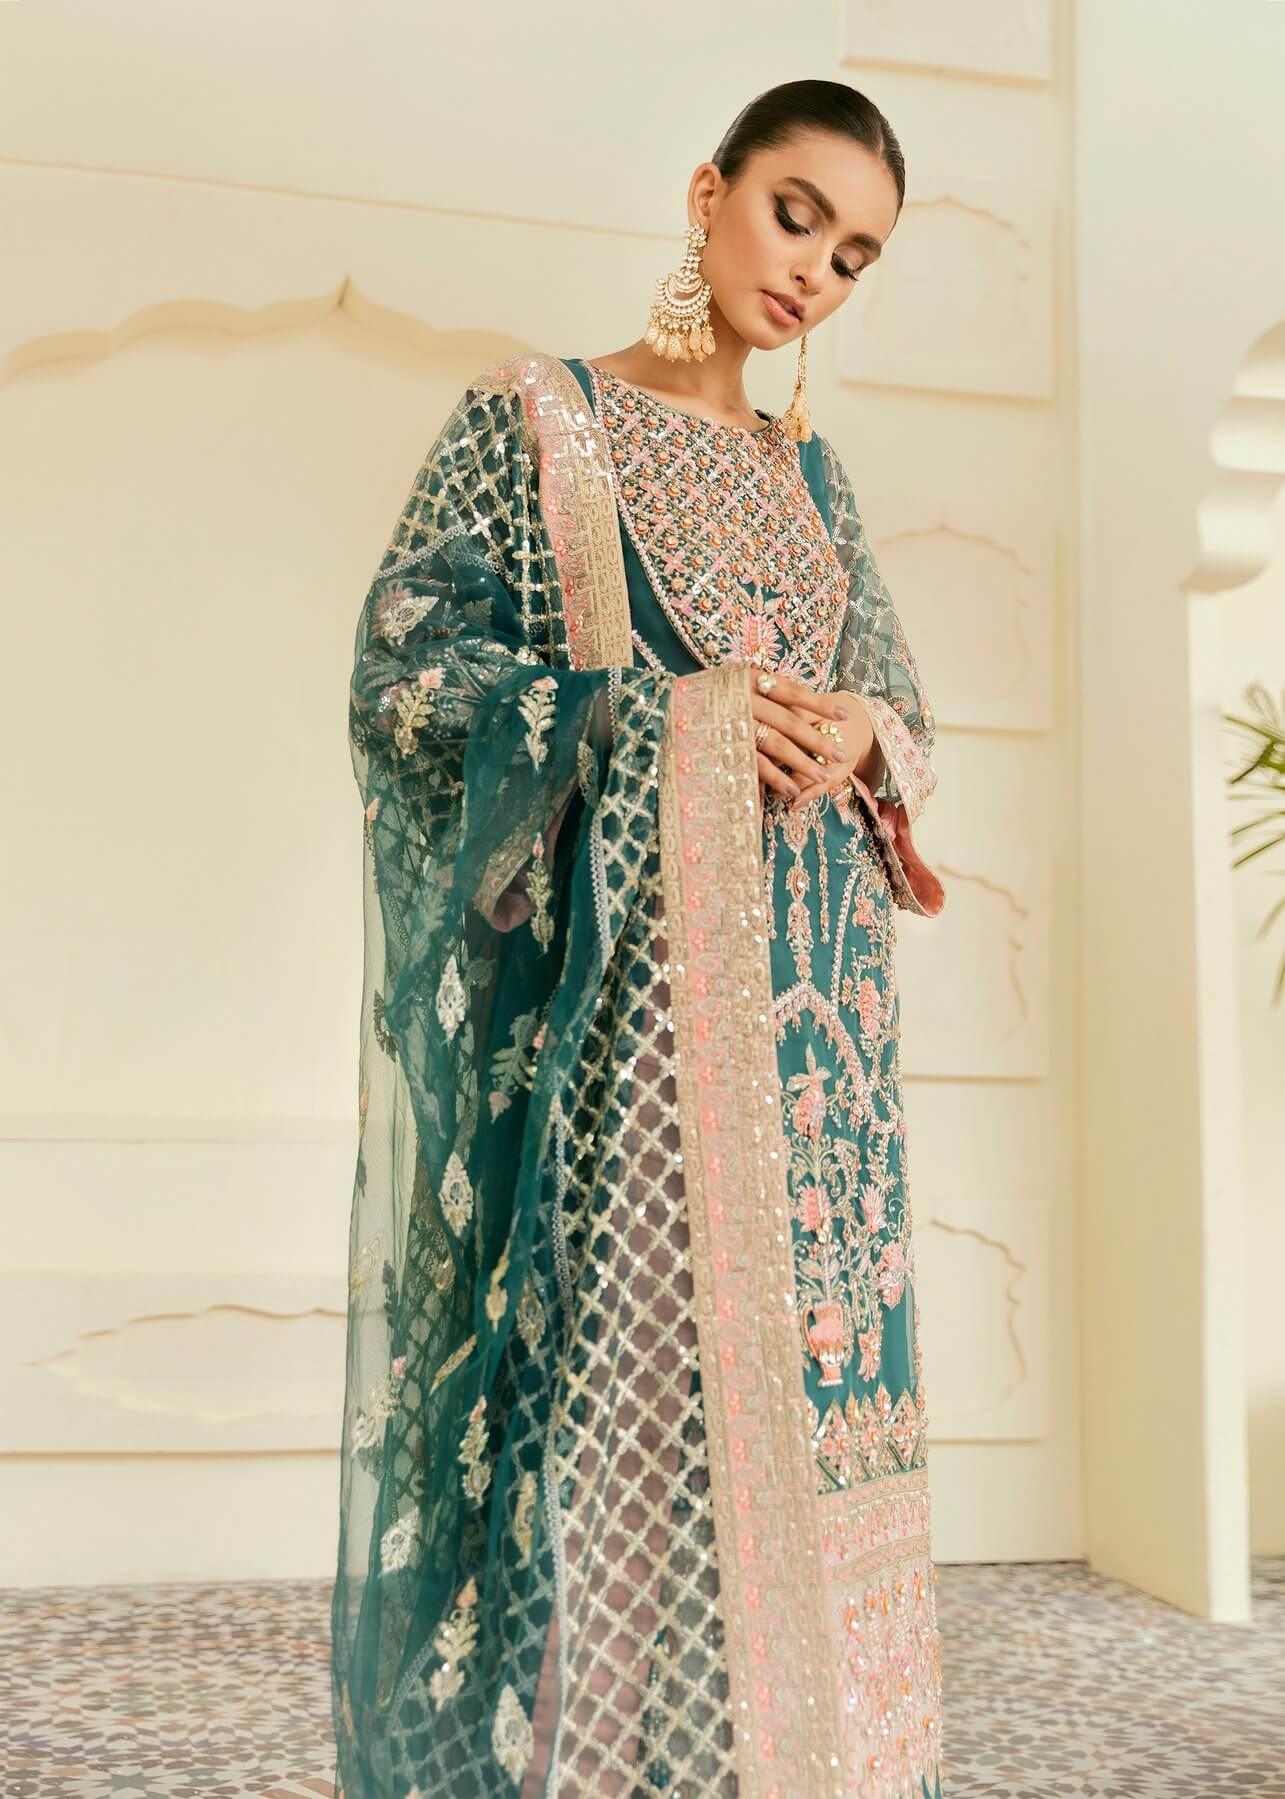 Akbar Aslam Elinor Embroidered Formal Wedding 3pc Suit AAWC-1387 TOUCA